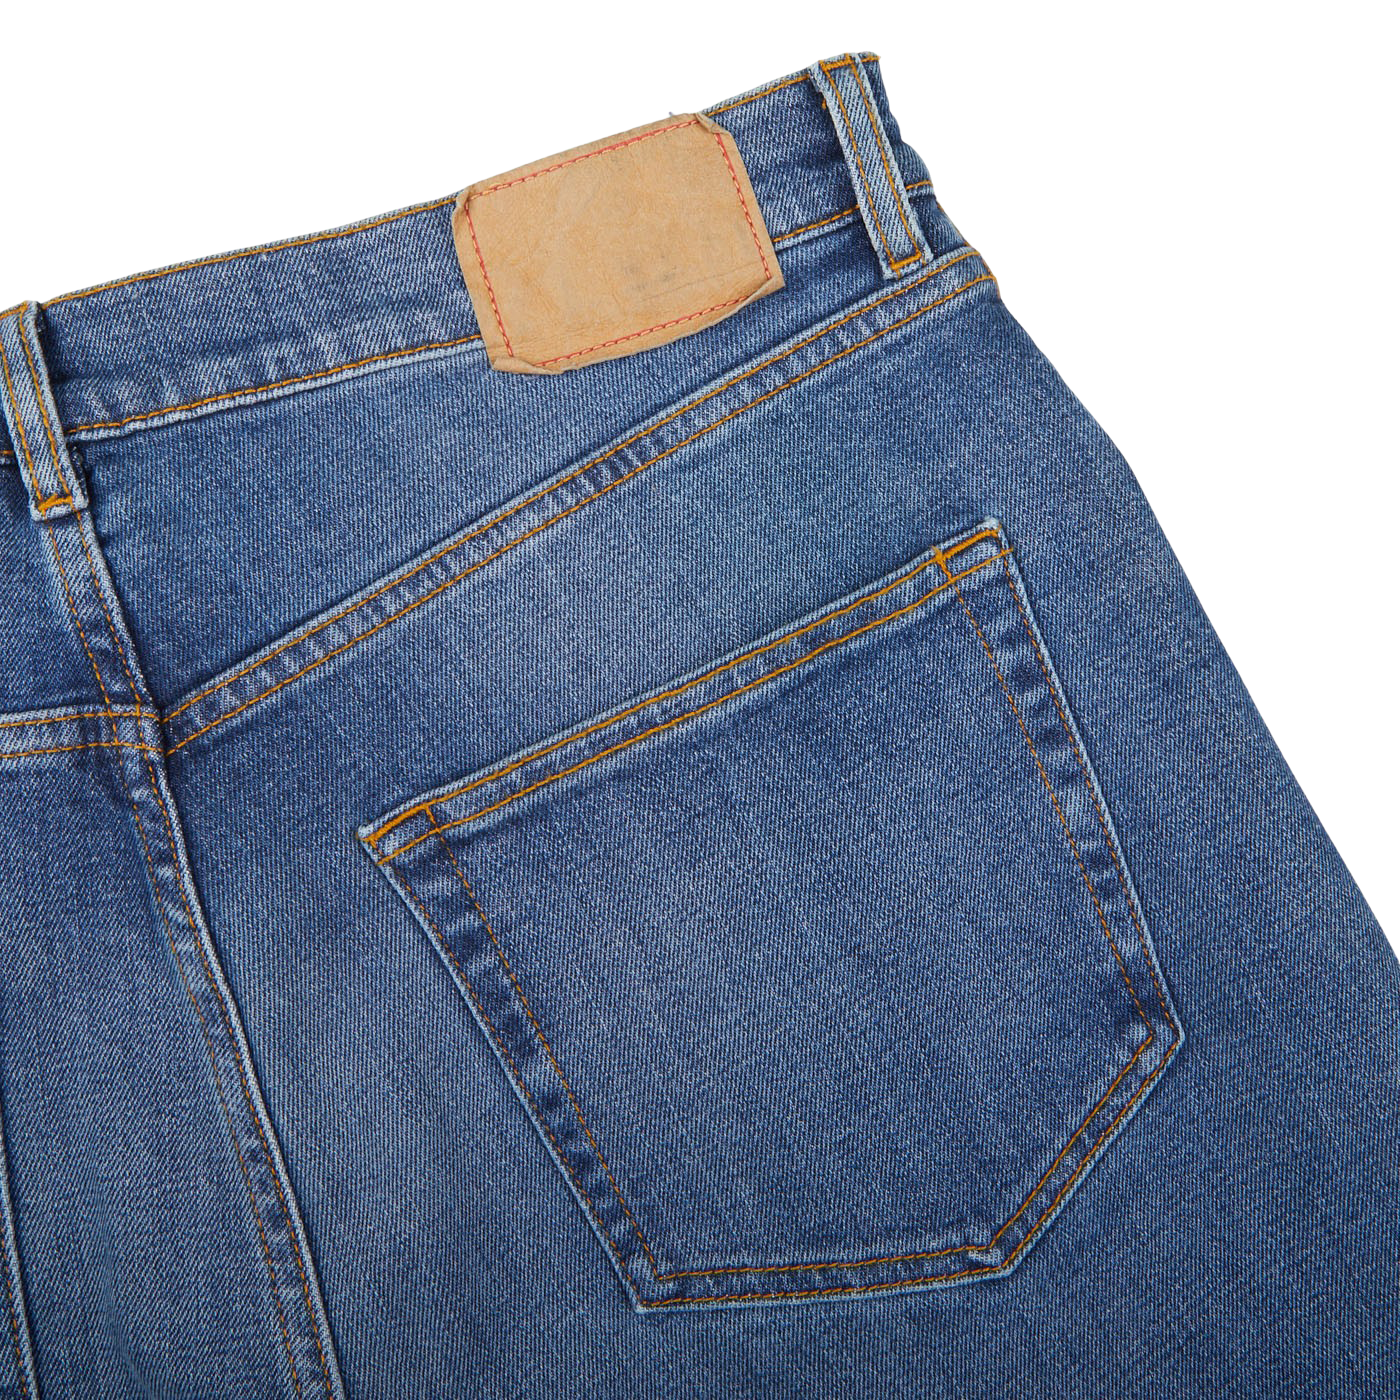 The back pocket of a pair of Jeanerica Blue Mid-Vintage Cotton TM005 Jeans.